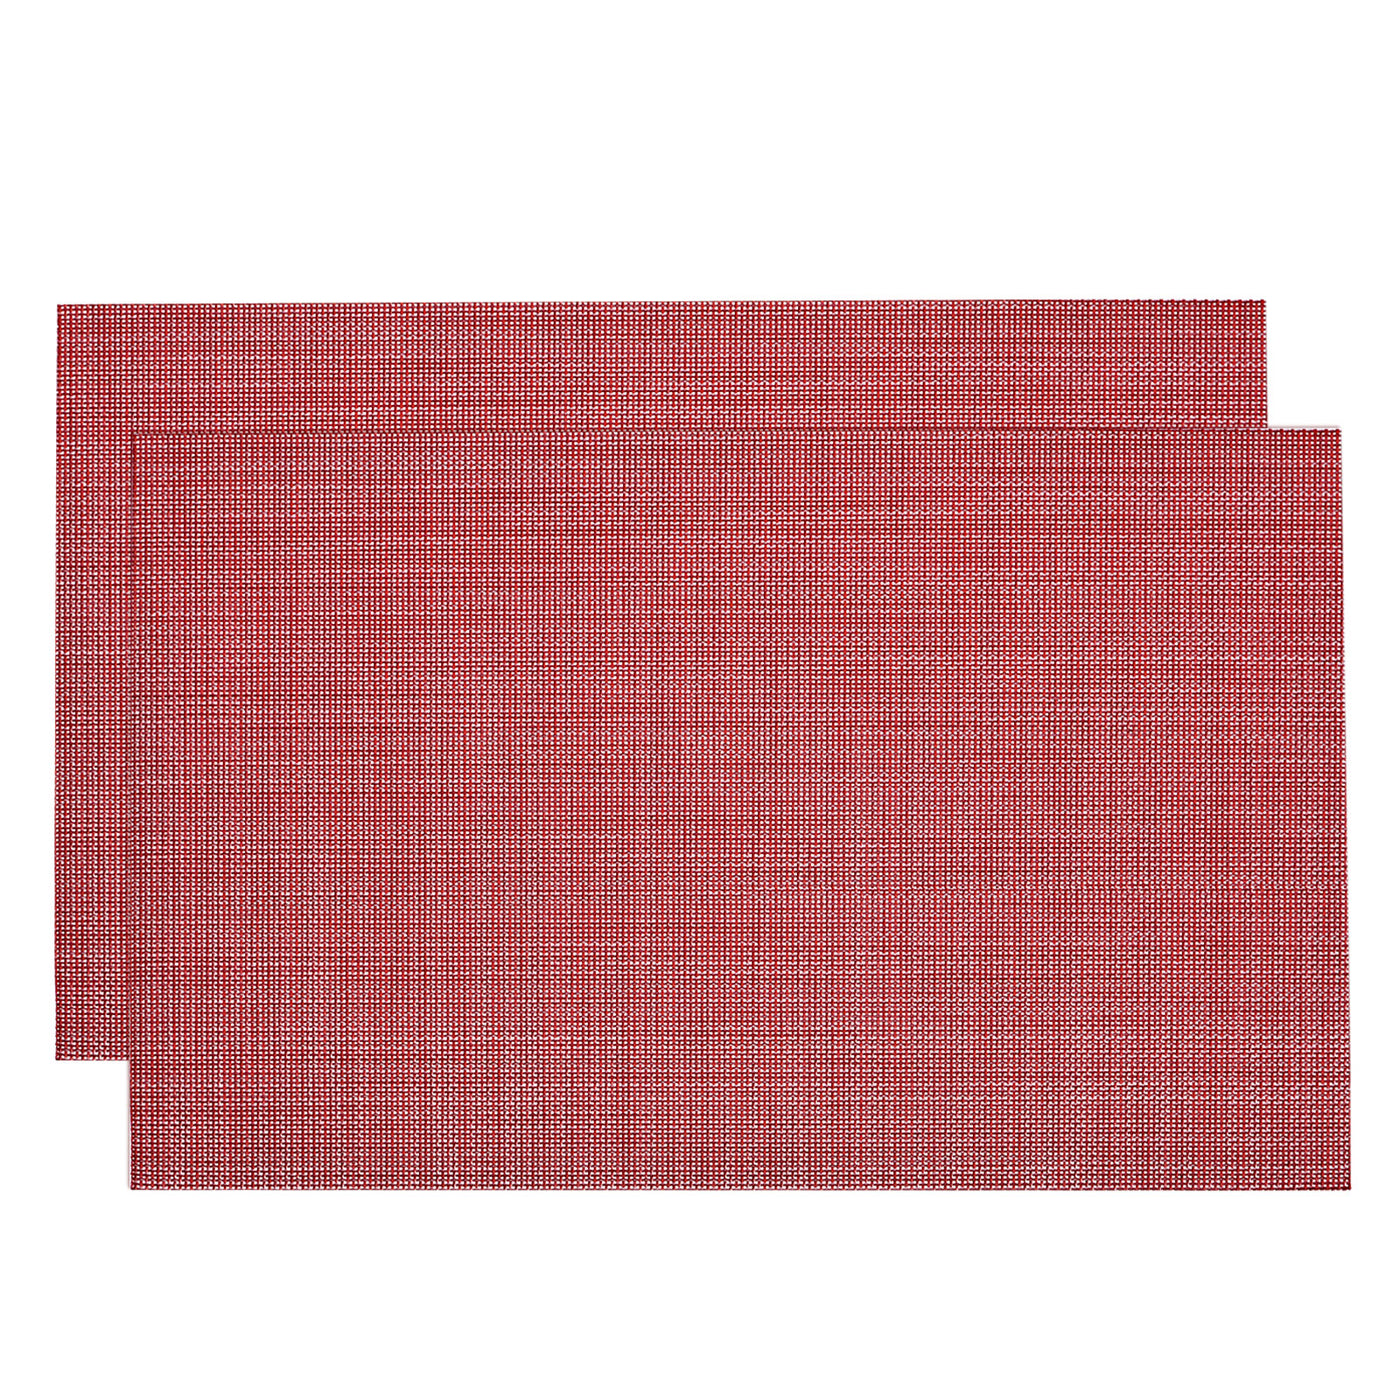 uxcell Uxcell Place Mats, 450x300mm Table Mats Set of 2 PVC Washable Woven Placemat Red